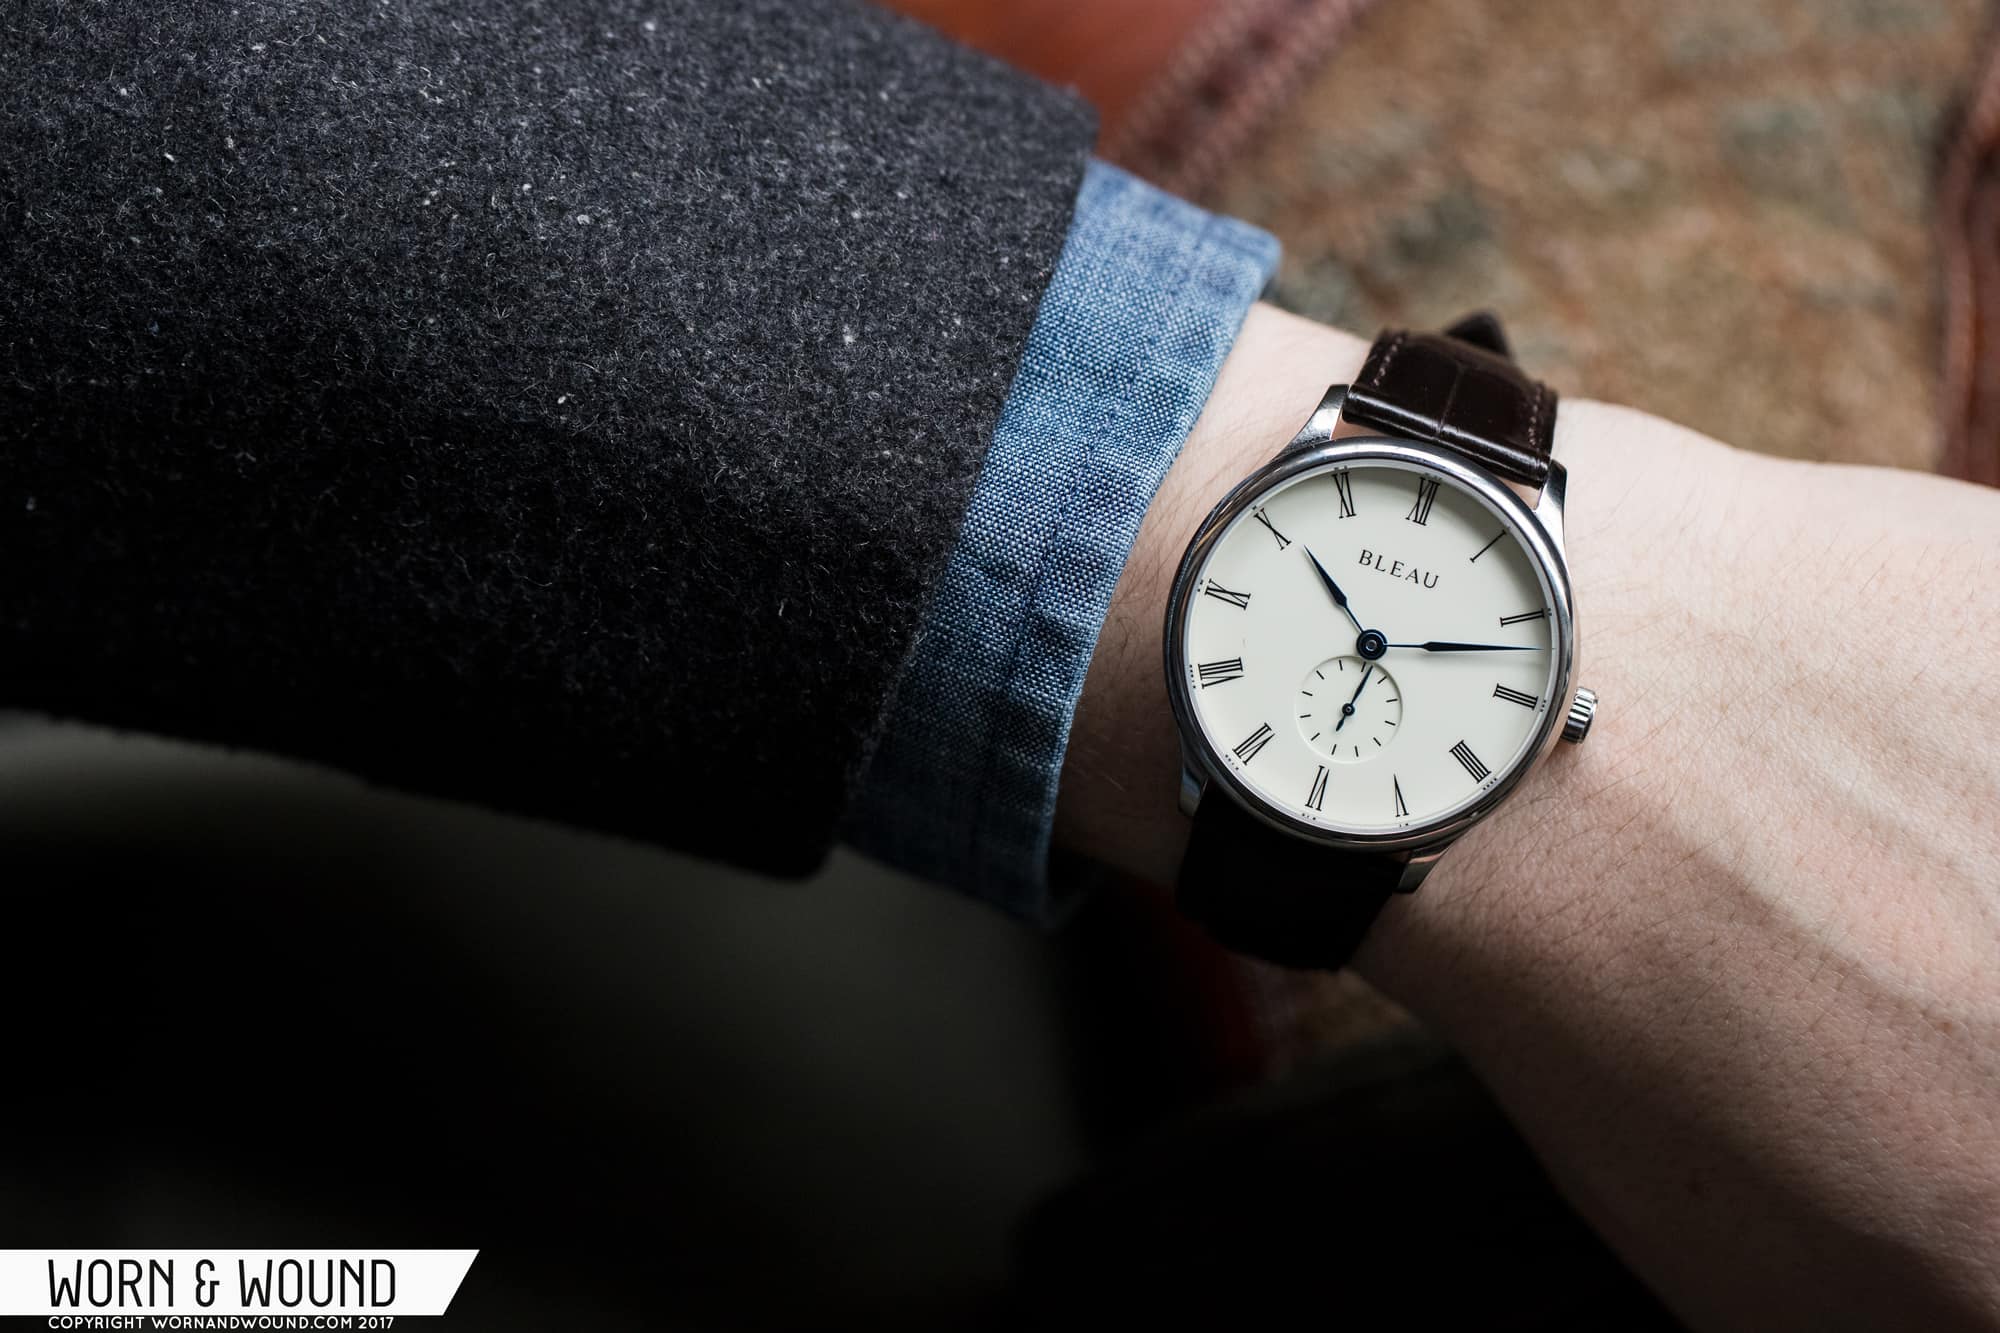 Hands-On with the Bleau Modest Collection - Worn & Wound